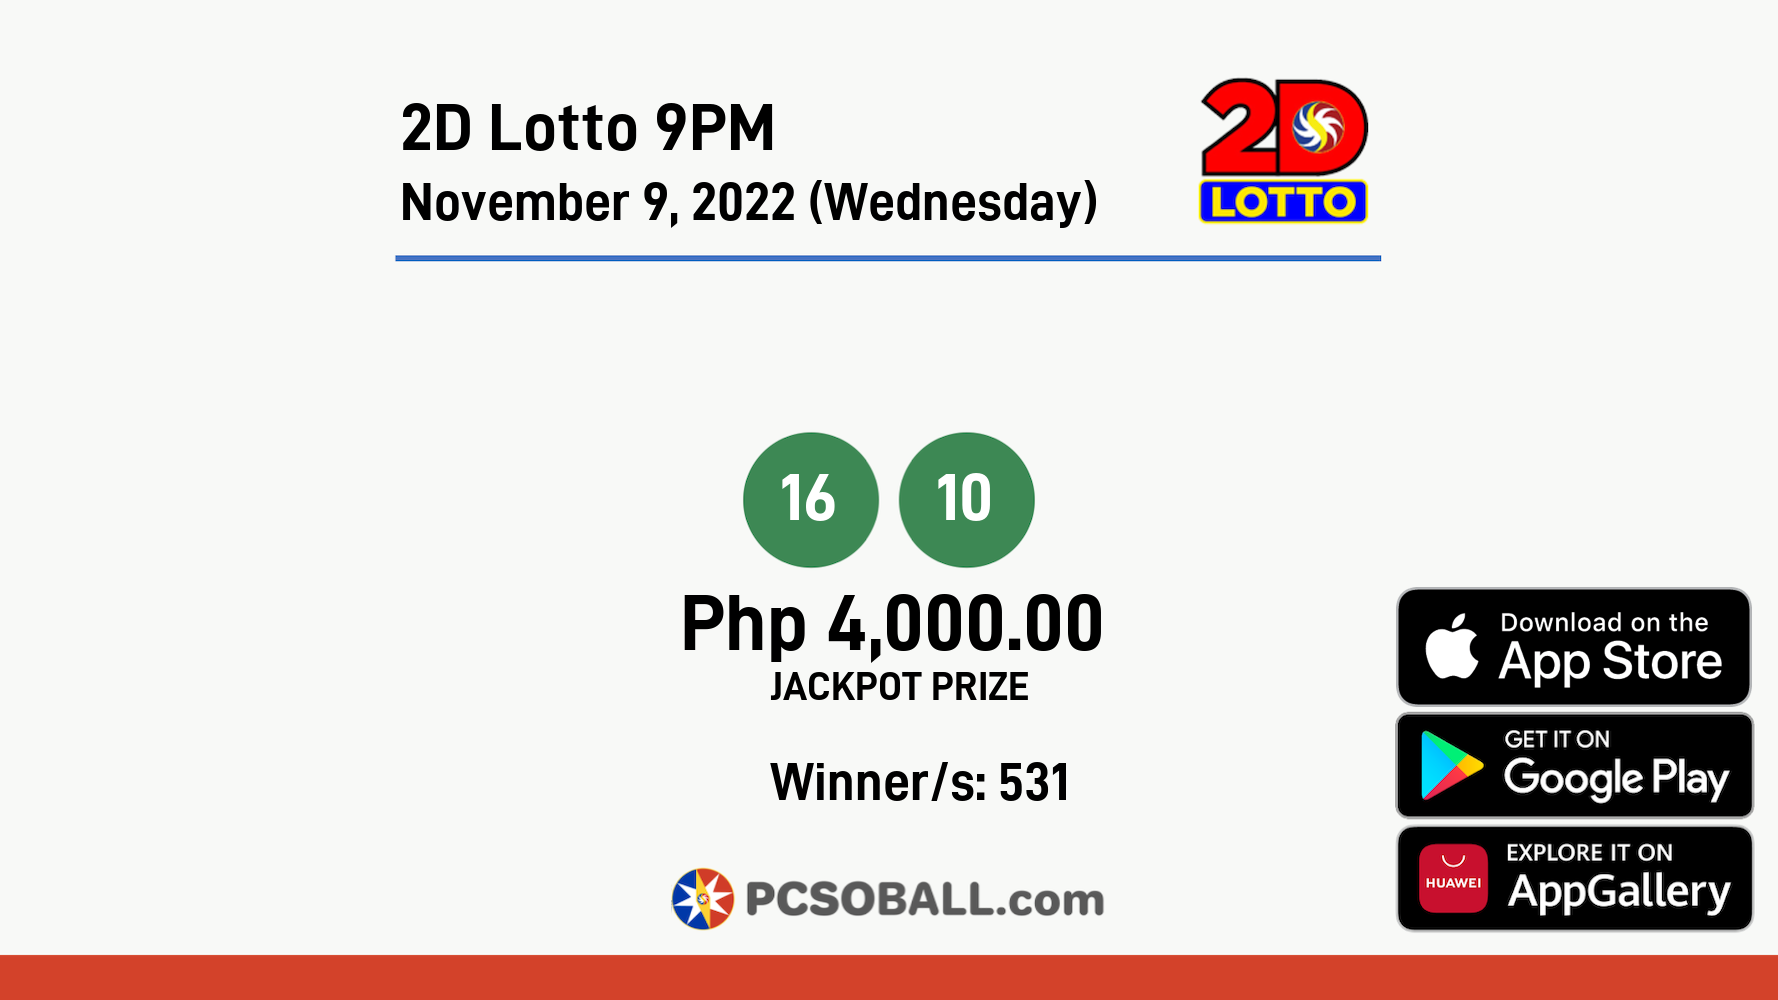 2D Lotto 9PM November 9, 2022 (Wednesday) Result